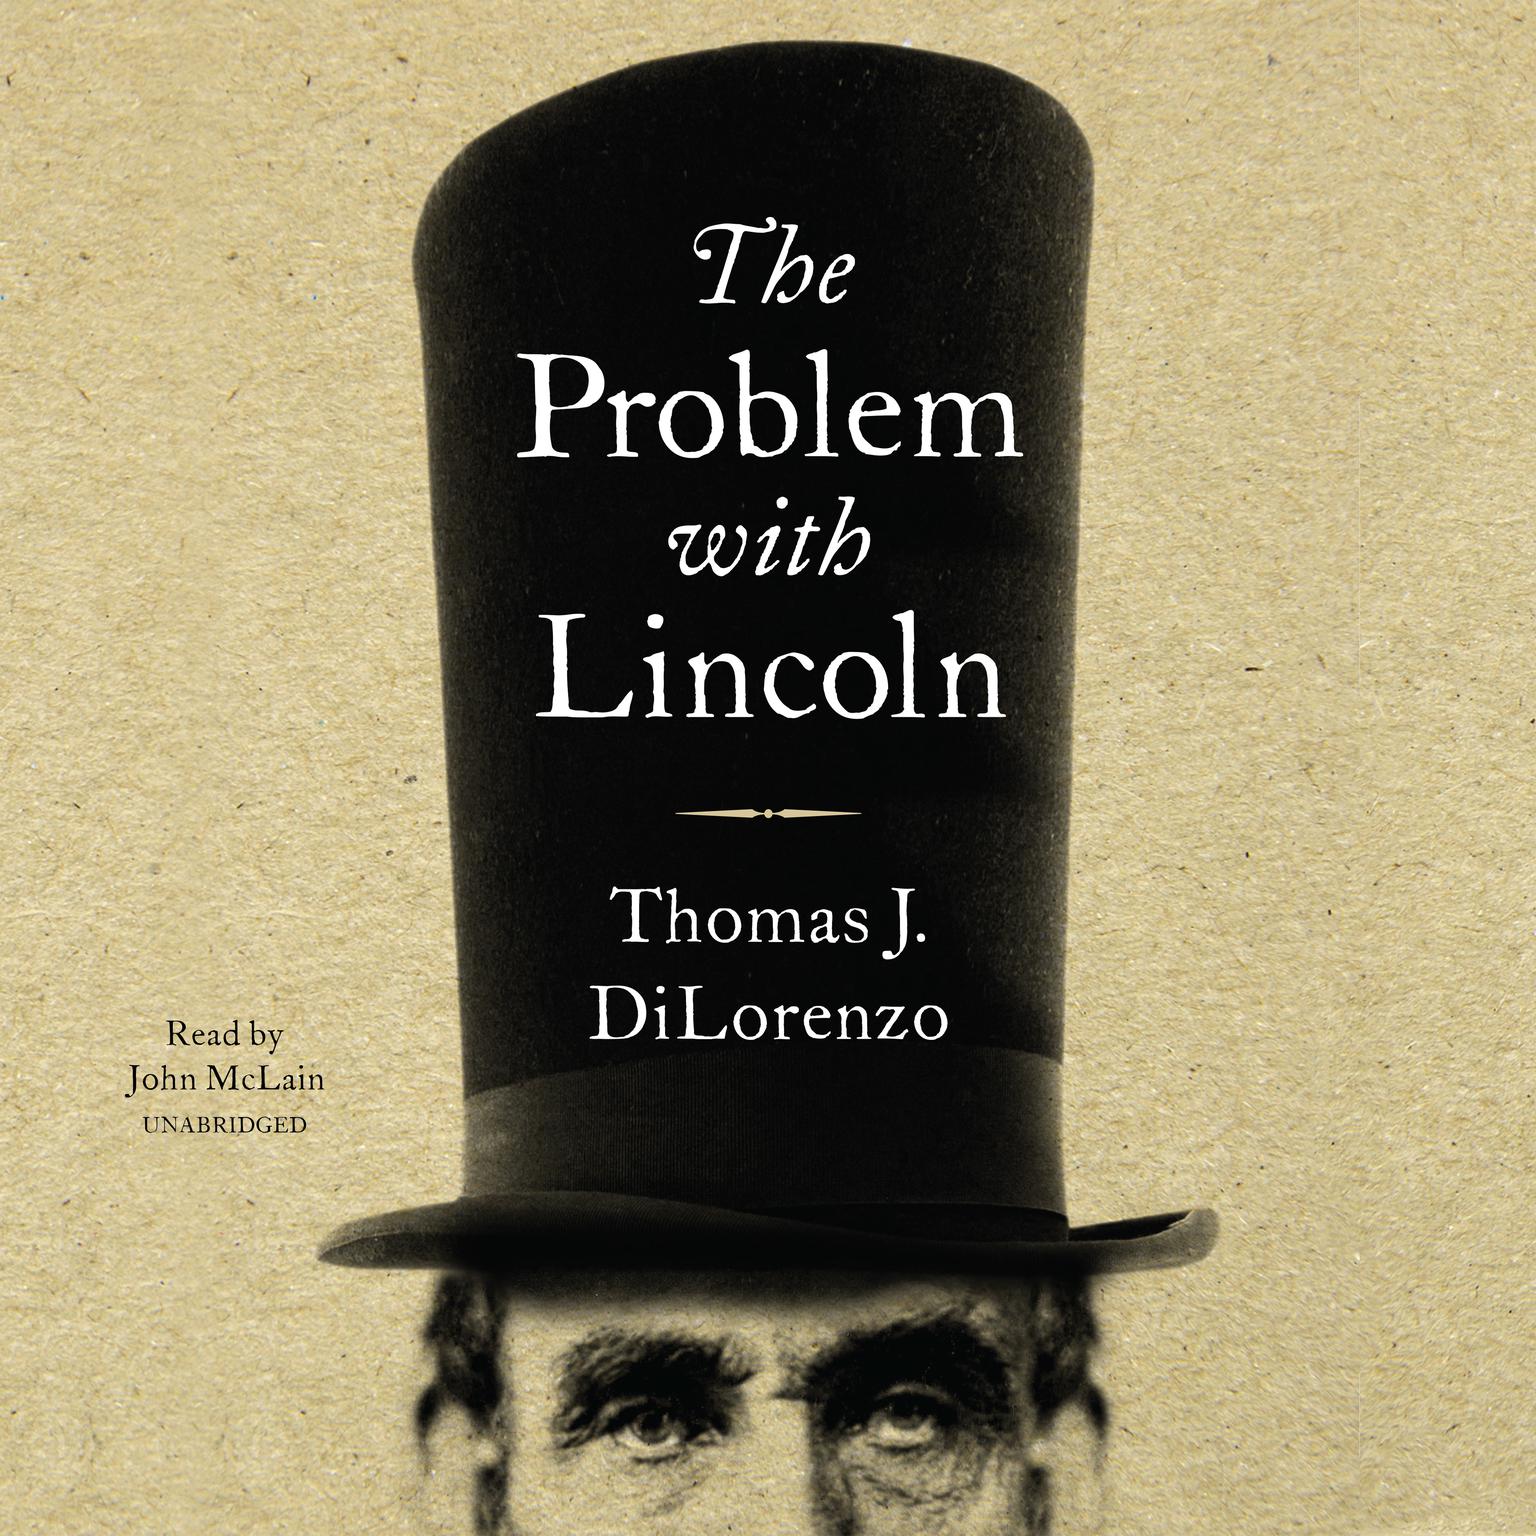 The Problem with Lincoln Audiobook, by Thomas J. DiLorenzo